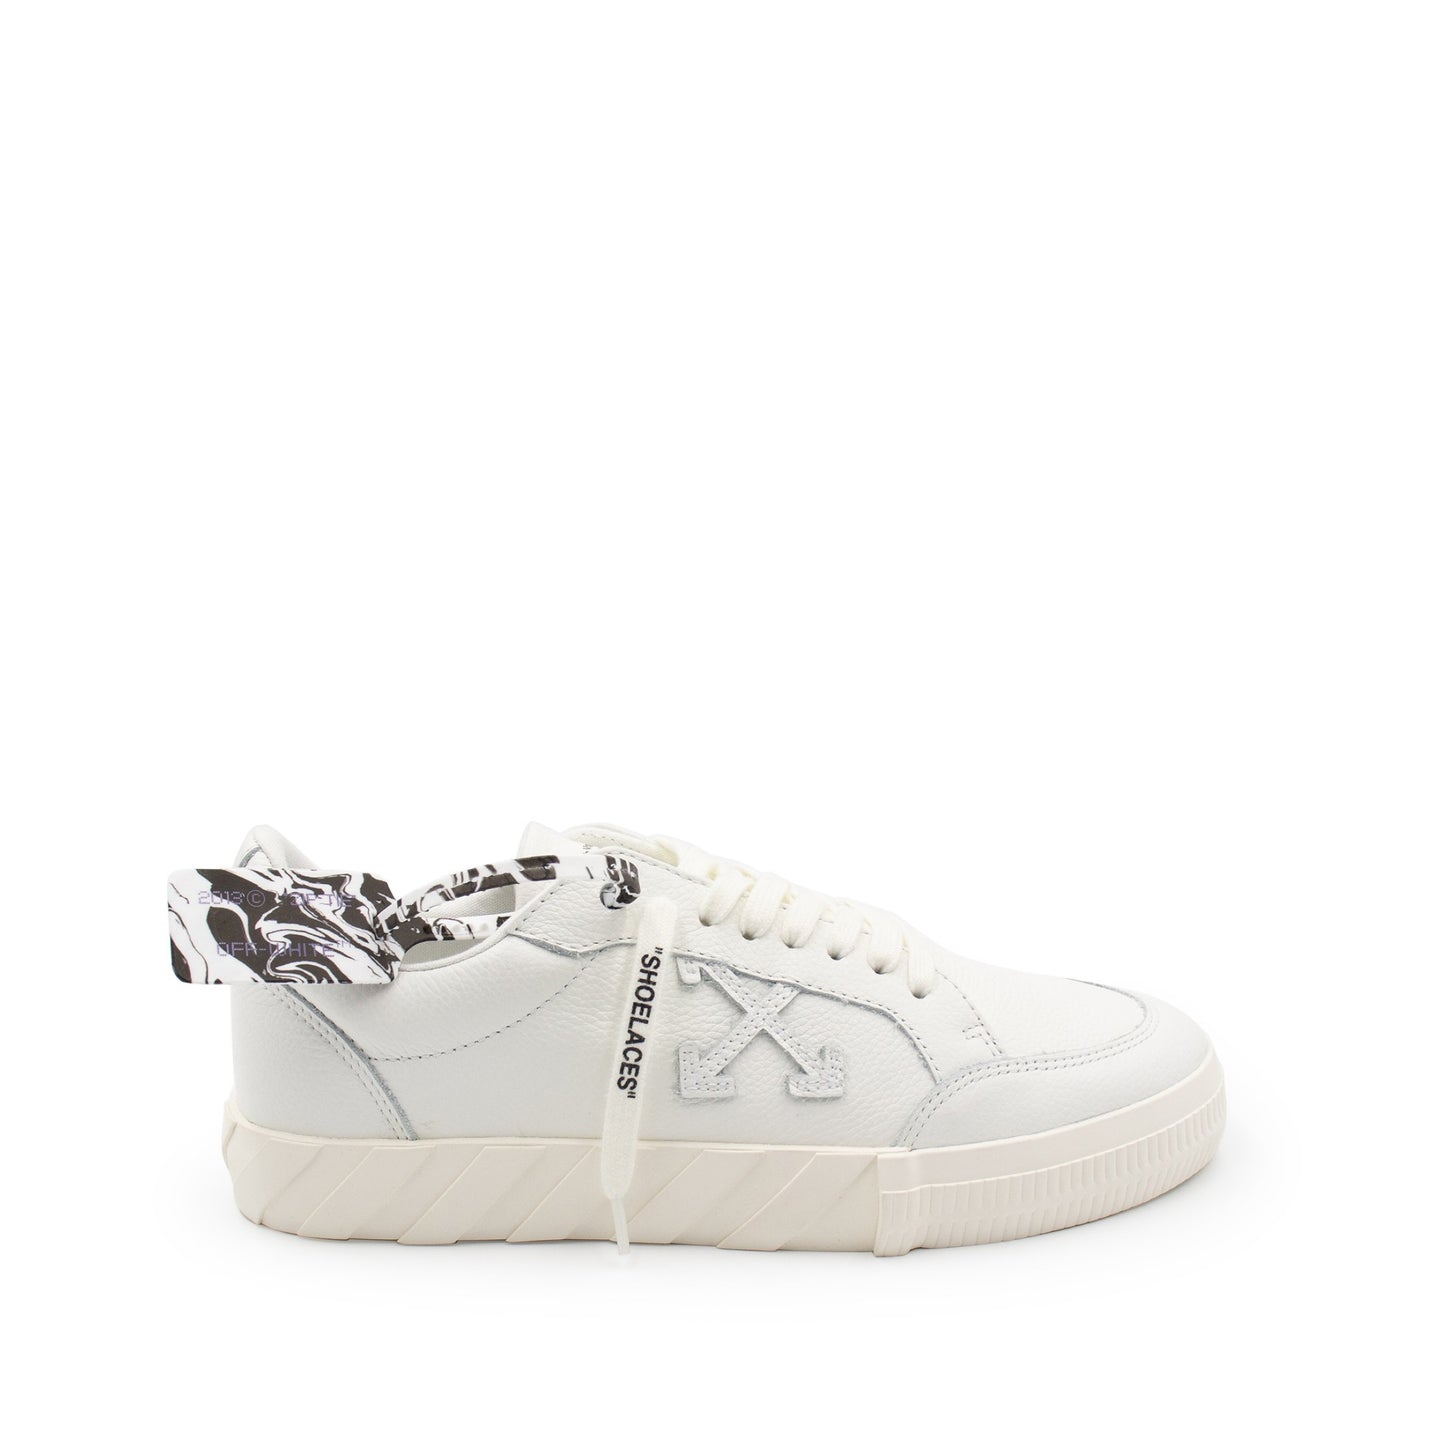 Low Vulcanized Calf Leather Sneaker in White/White